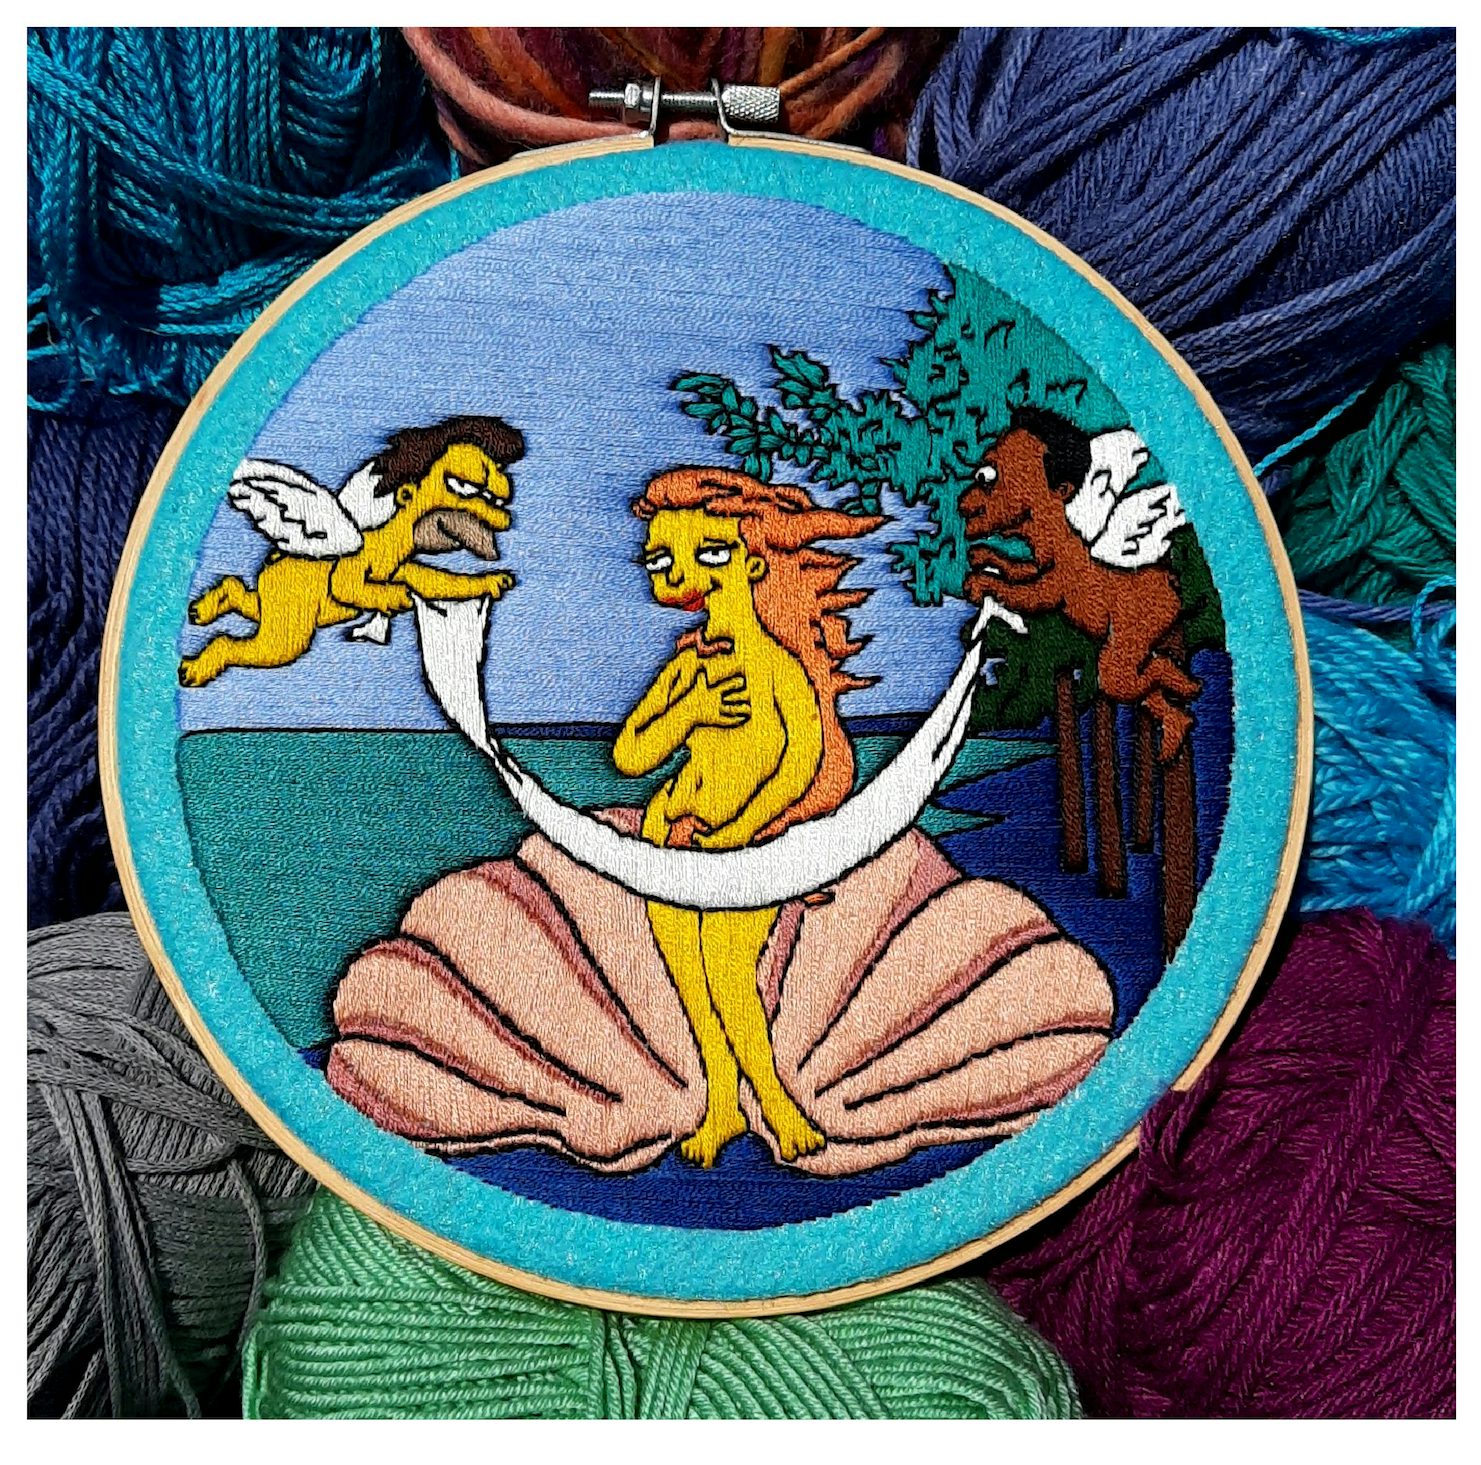 Bazarbartiano Ain't You Ever Seen a Chick Riding a Clam Before? embroidery 2021 Evergreen Fantasies [FINAL VERSION] PAGES9